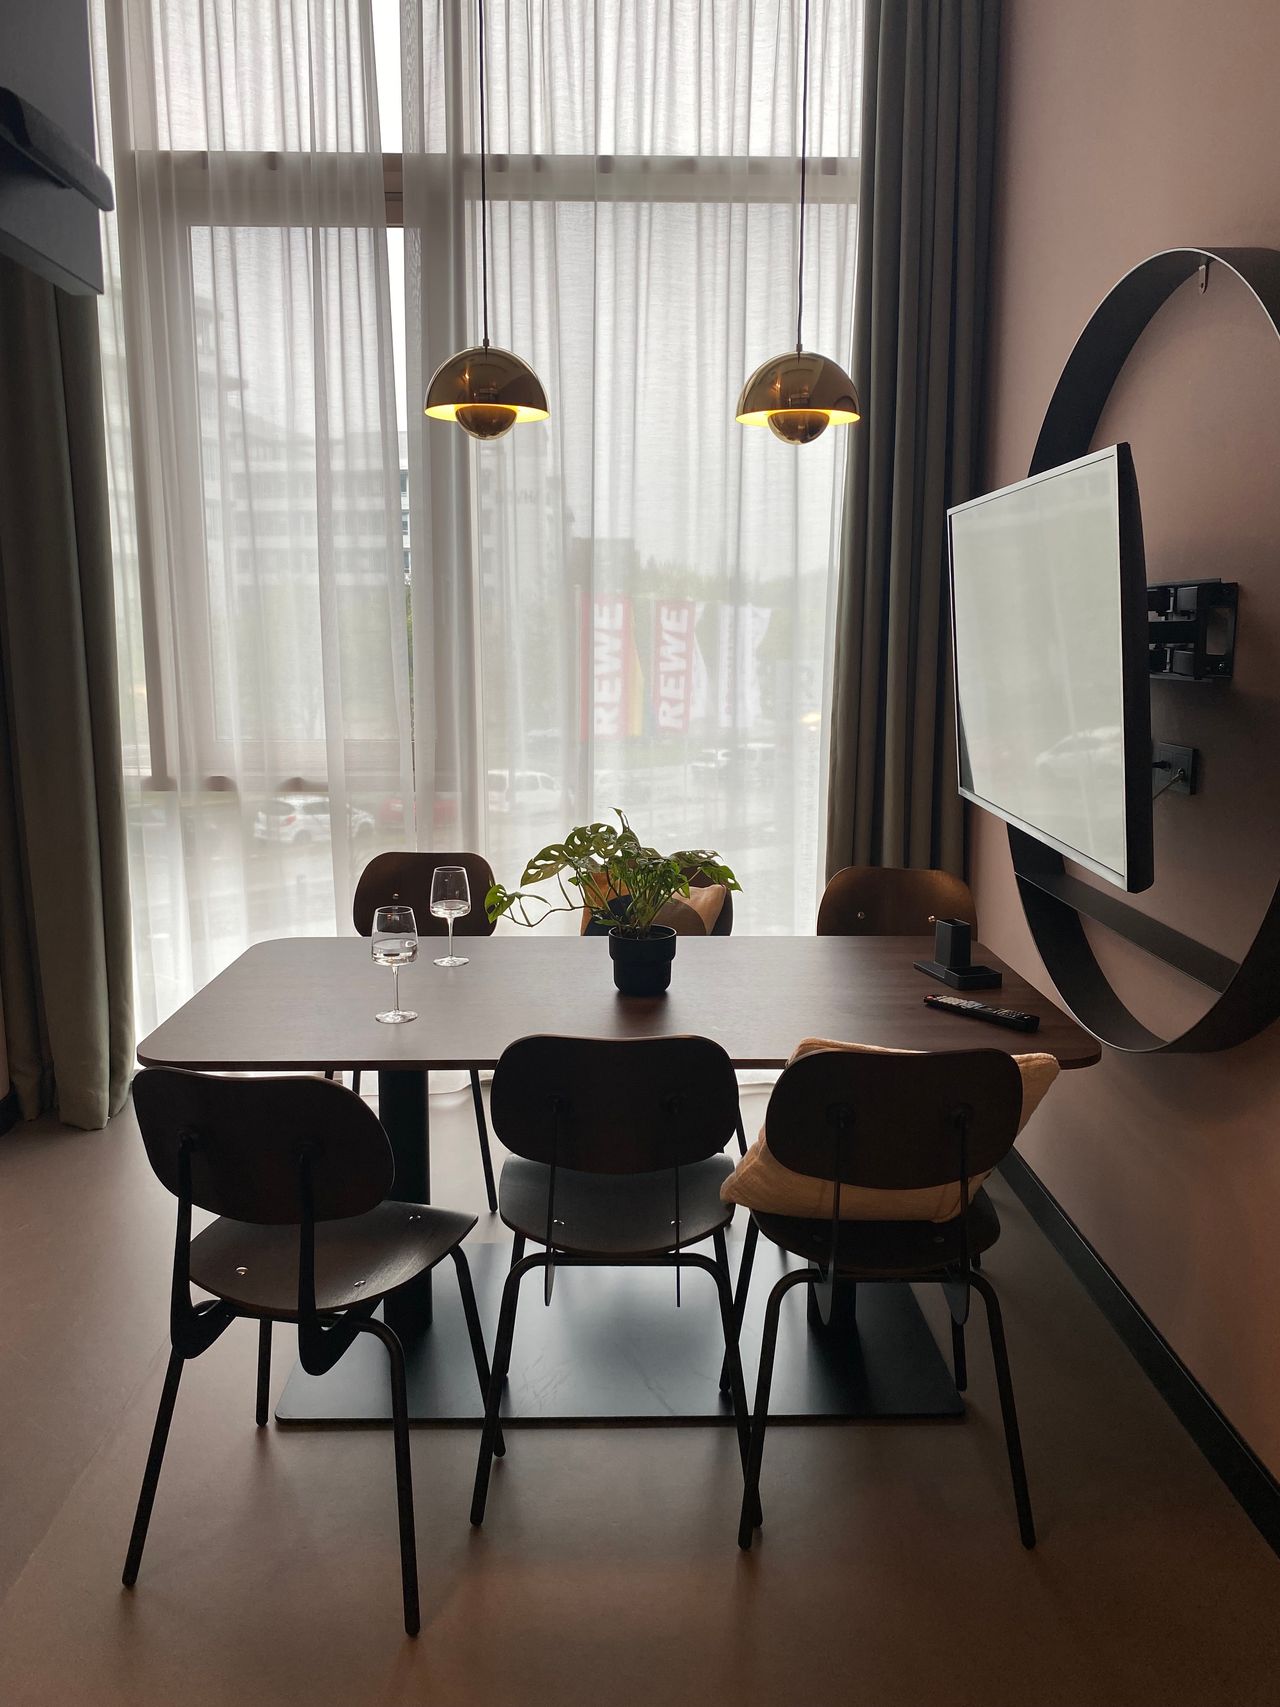 Gorgeous and modern DUPLEX Serviced Apartment in Munich incl. Cleaning, Gym, WIFI, TV TAX, Social Spaces (Cinema, Library, etc.) and more!